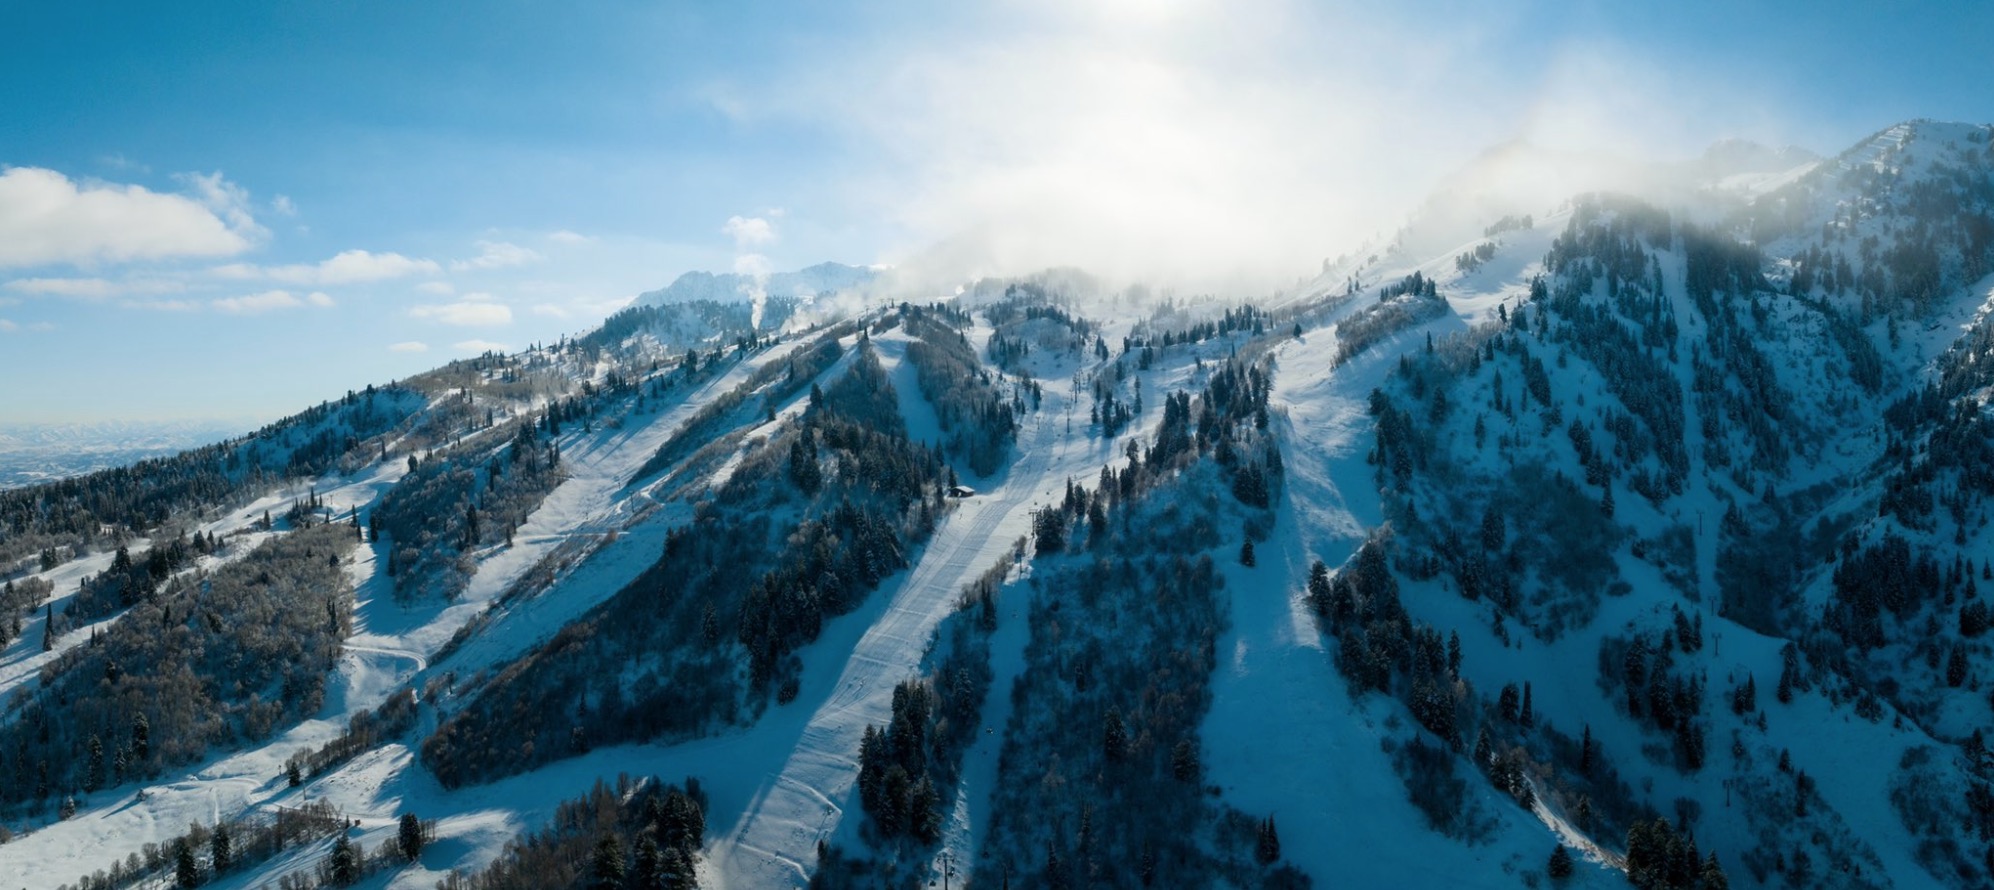 Snowbasin Resort Announces Its Earliest Opening Ever